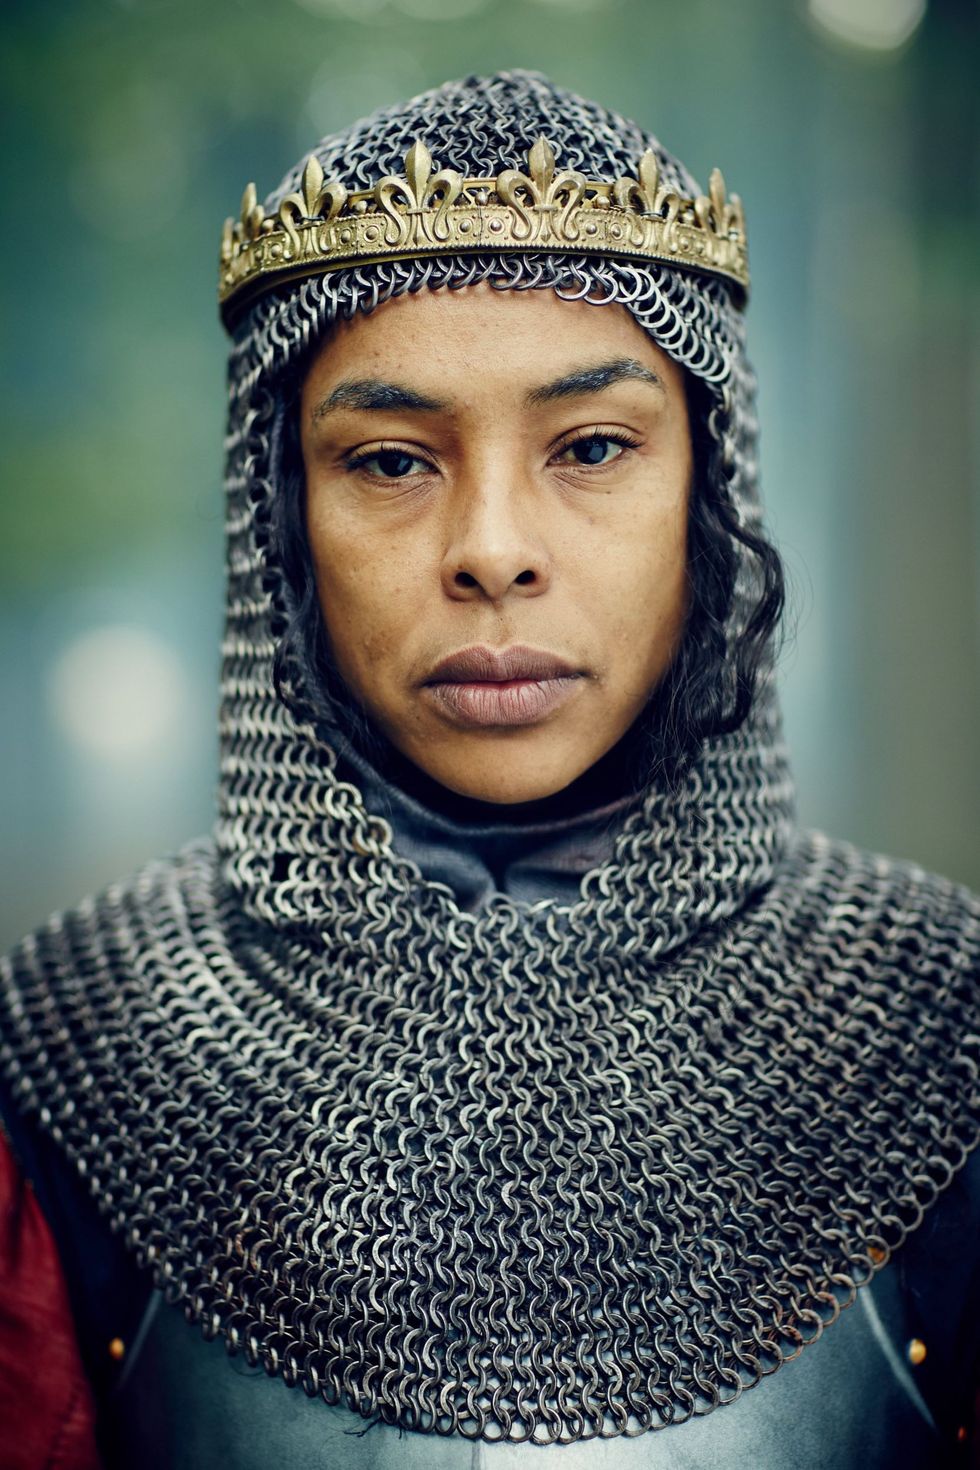 Sophie Okonedo Looks Absolutely Boss as Queen Margaret in 'The Hollow Crown: The Wars of the Roses'